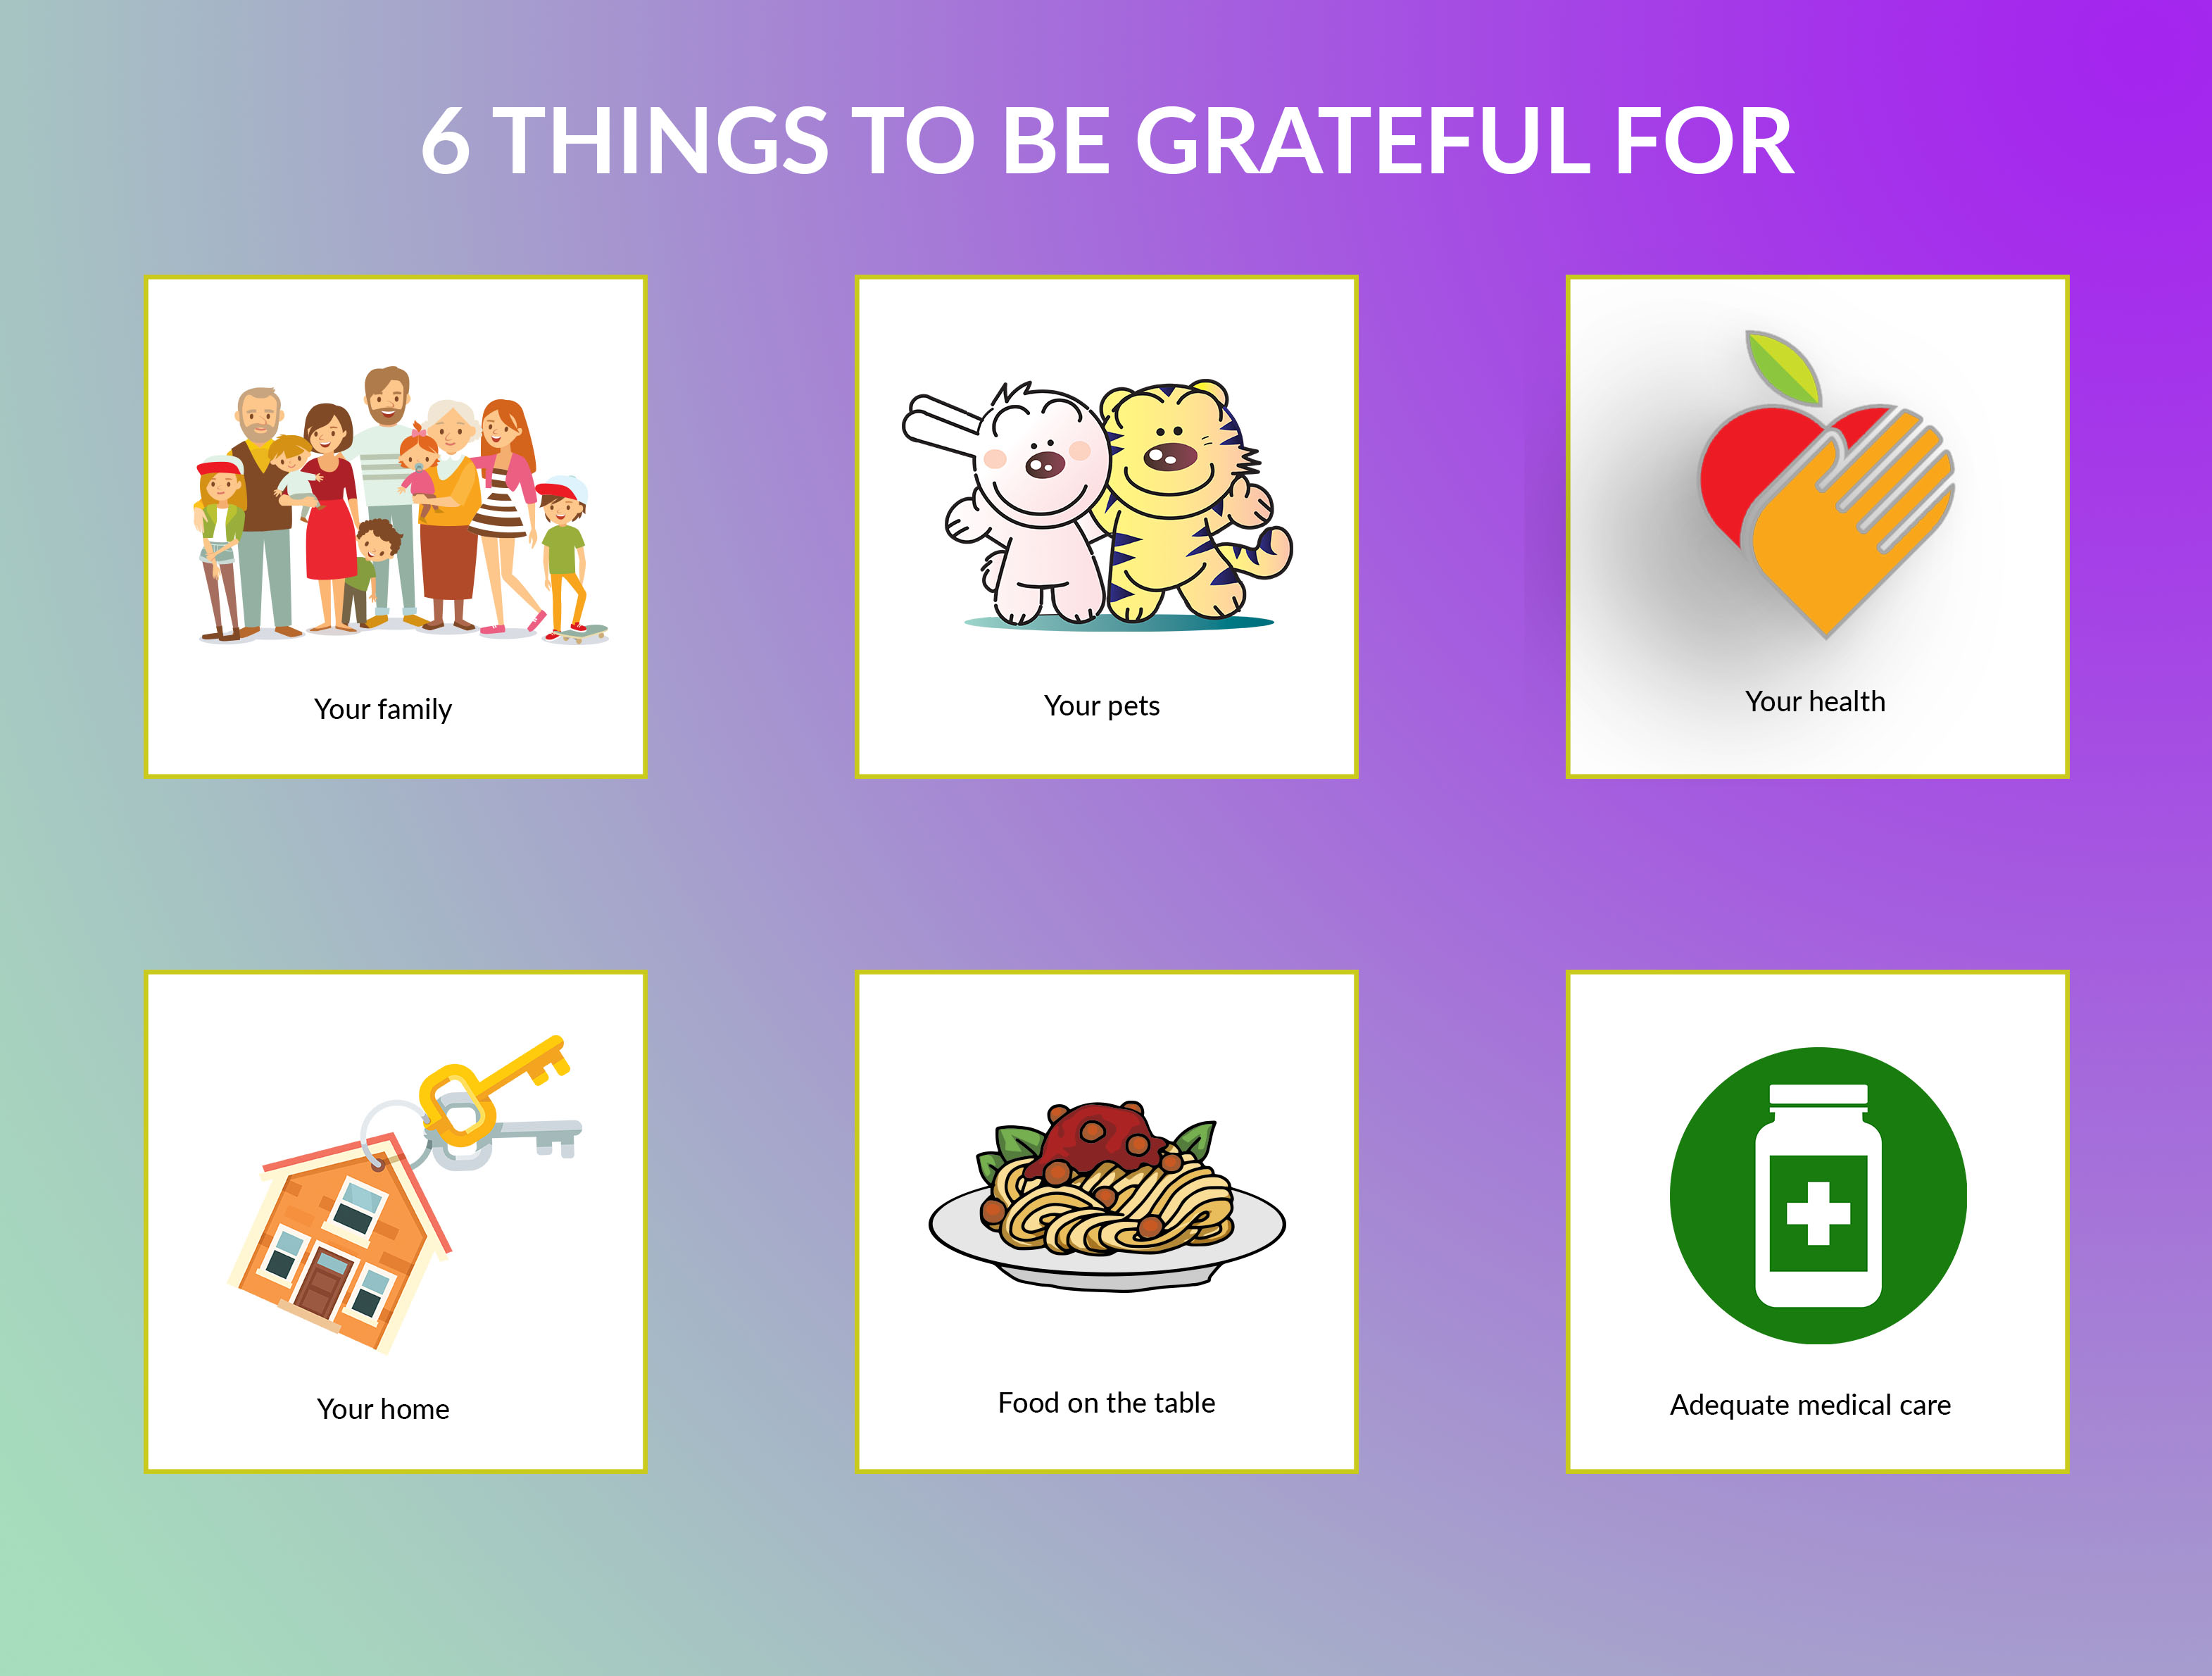 Things you can practise gratitude for